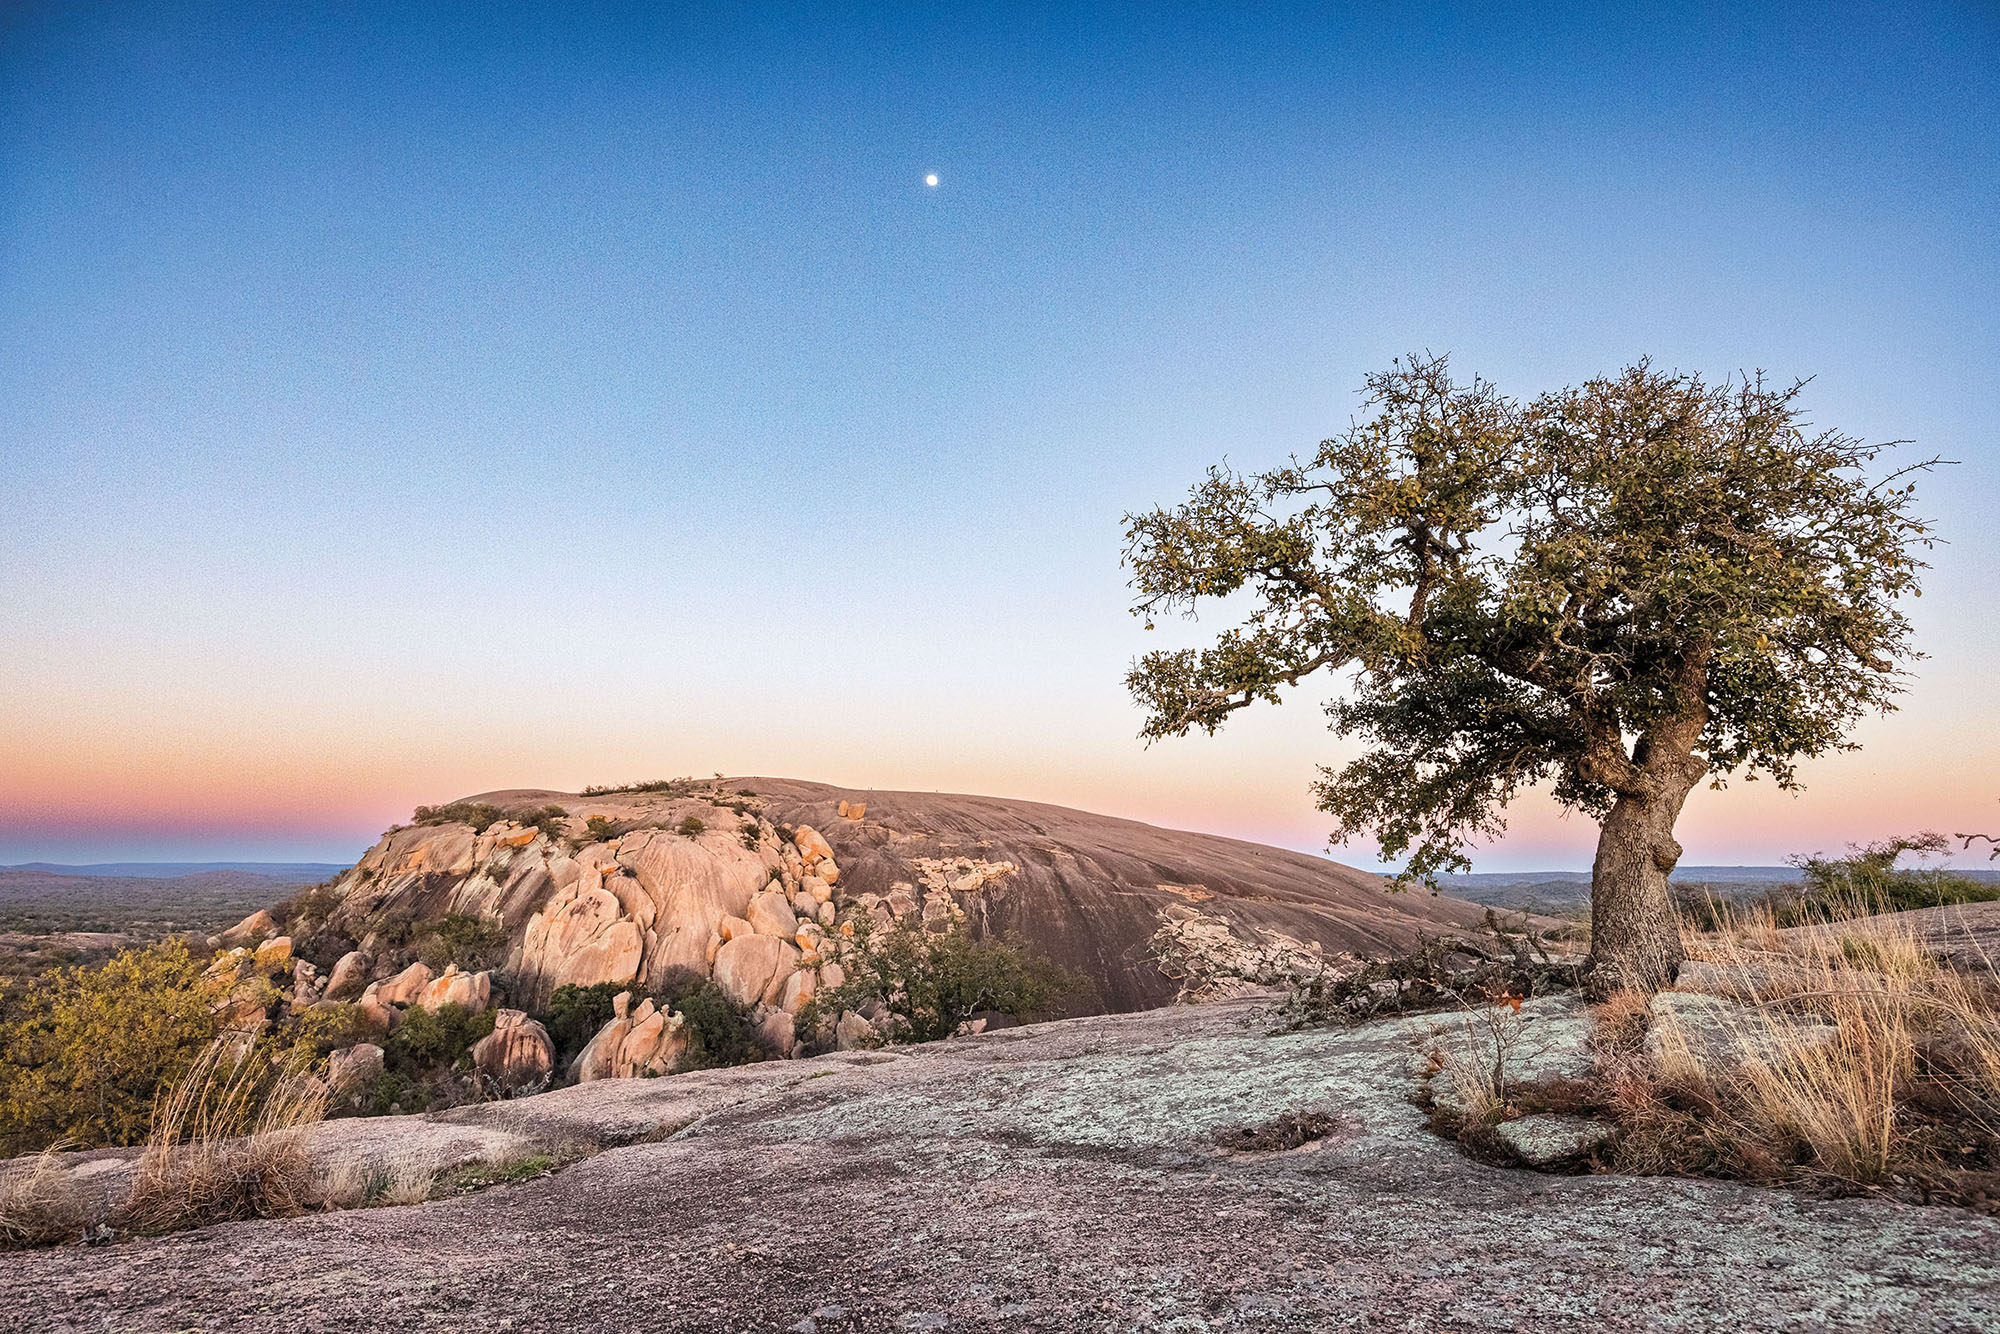 A lone oak tree sits on top of a granite hill with a large rock in the background, painted by a pink, gold and blue sunrise